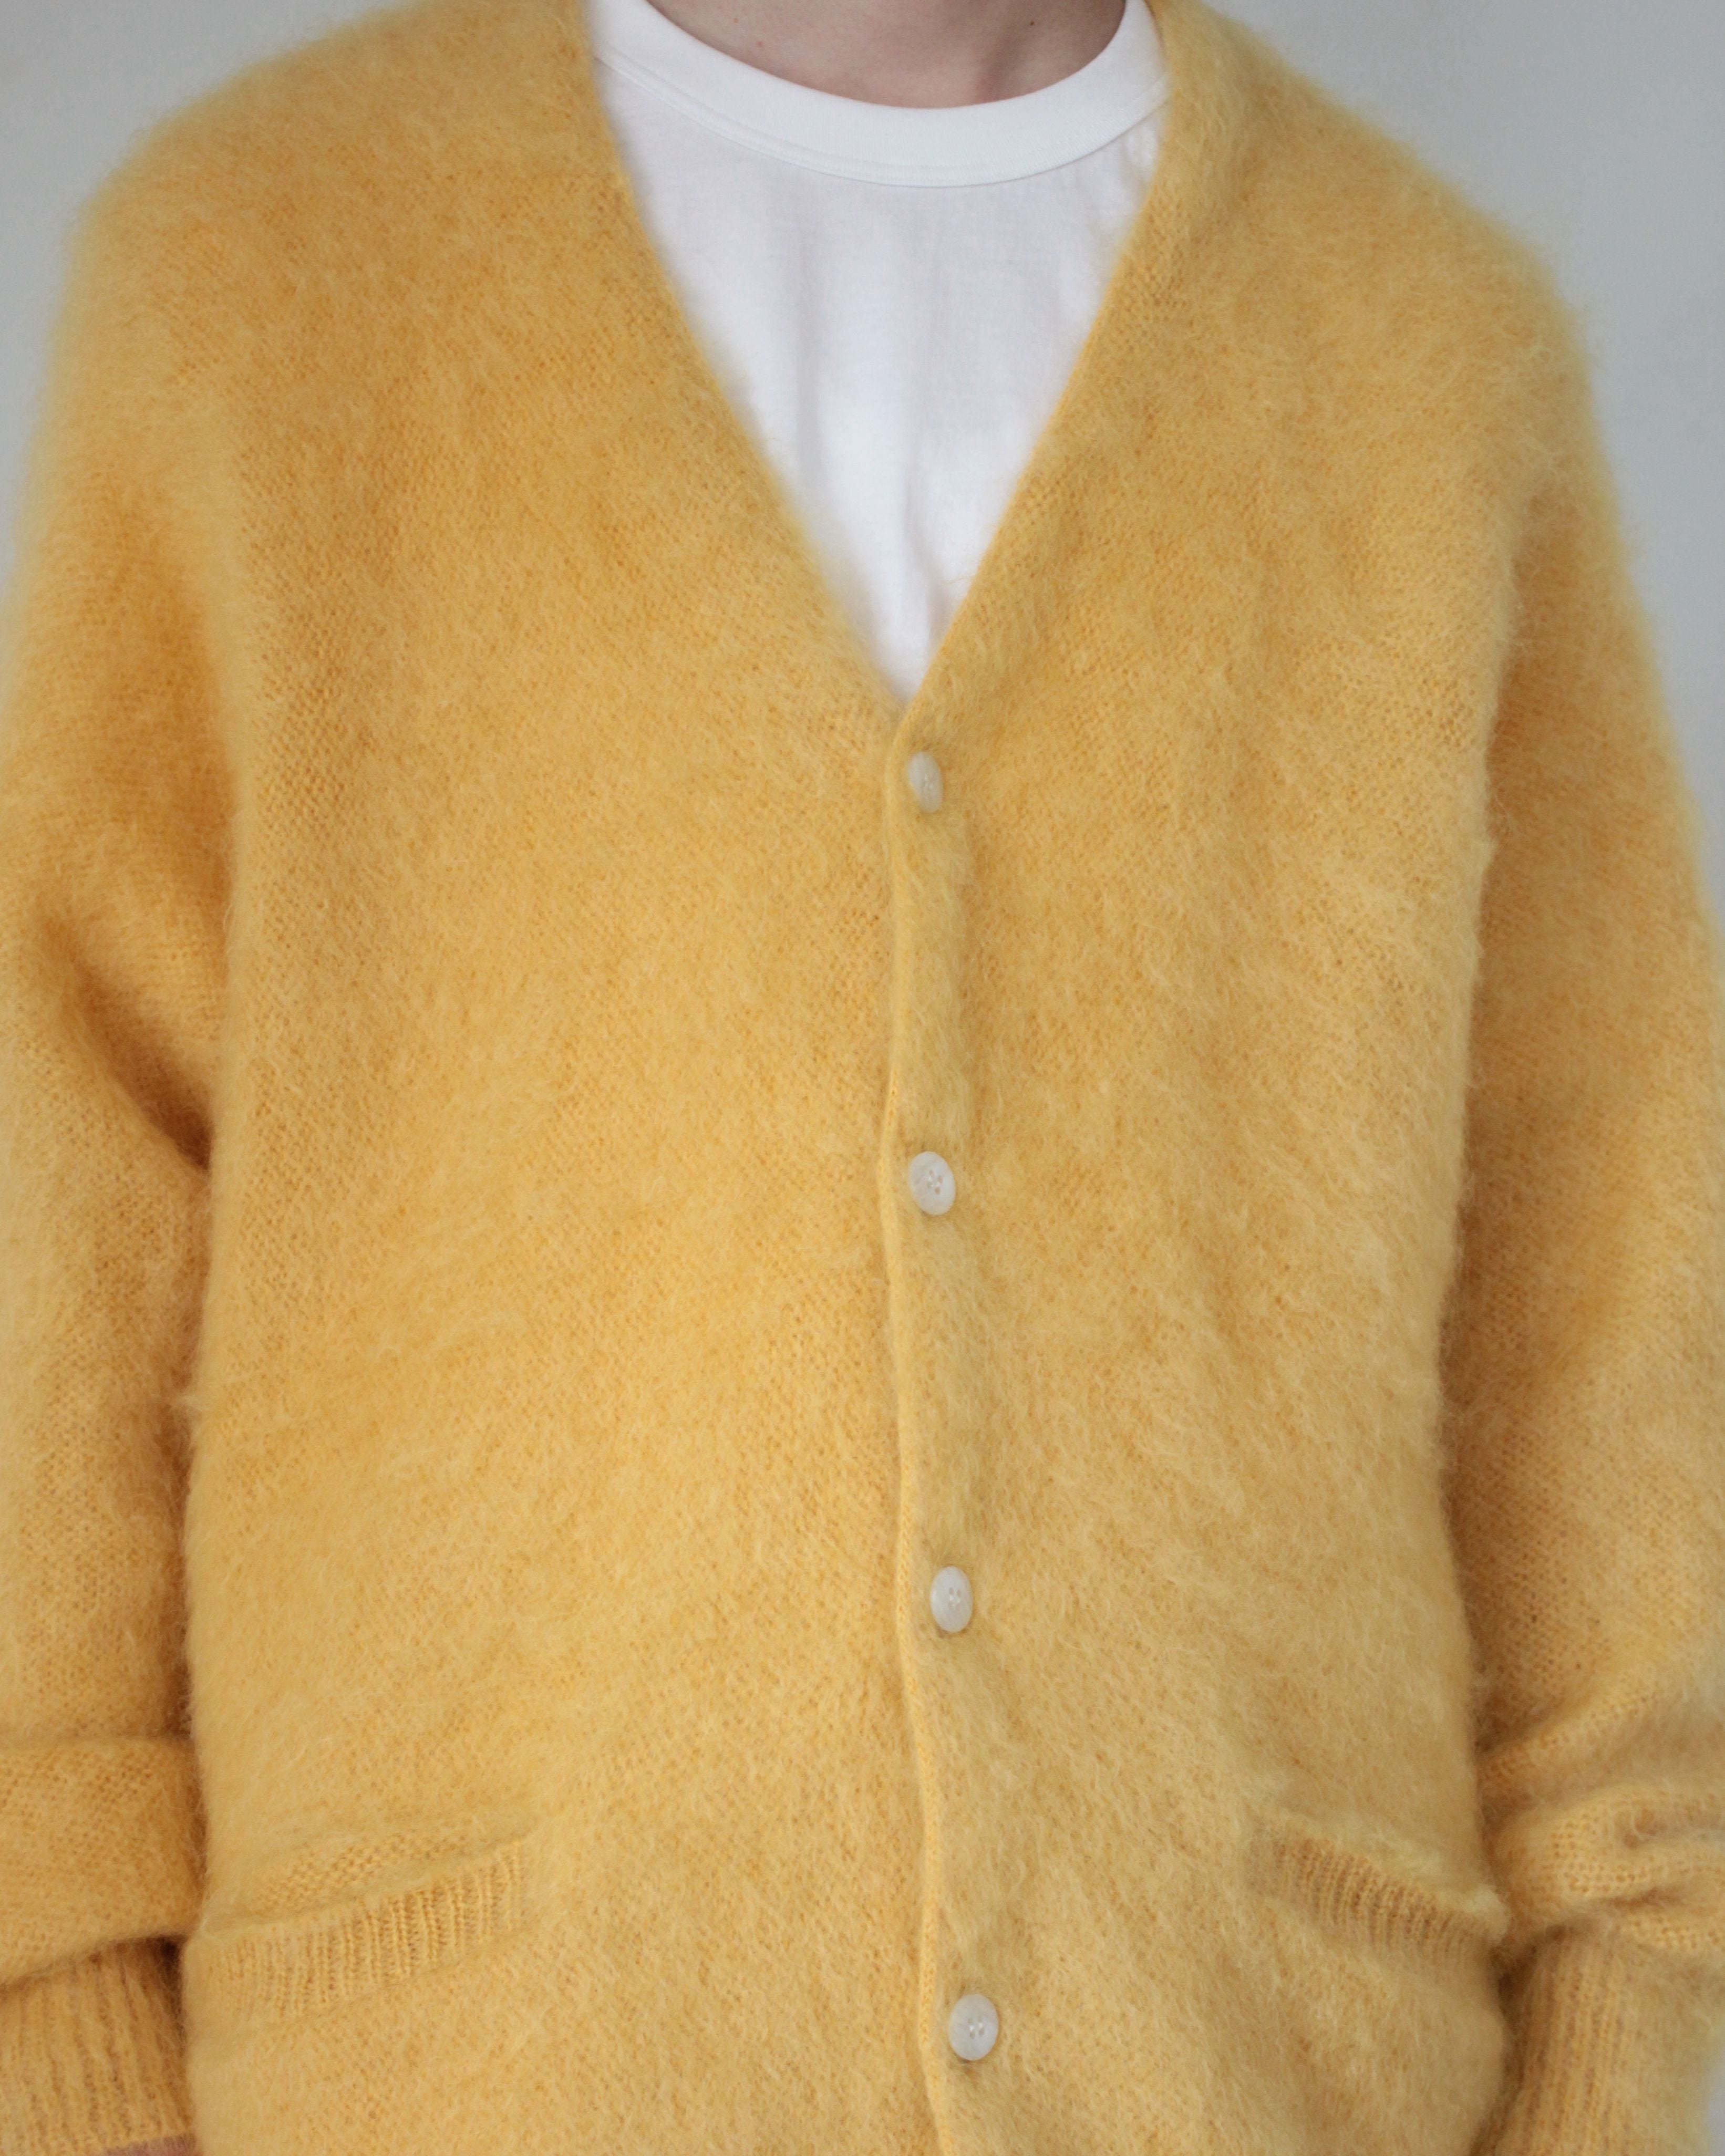 seven by seven（セブンバイセブン）/KNIT CARDIGAN - Brushed mohair 